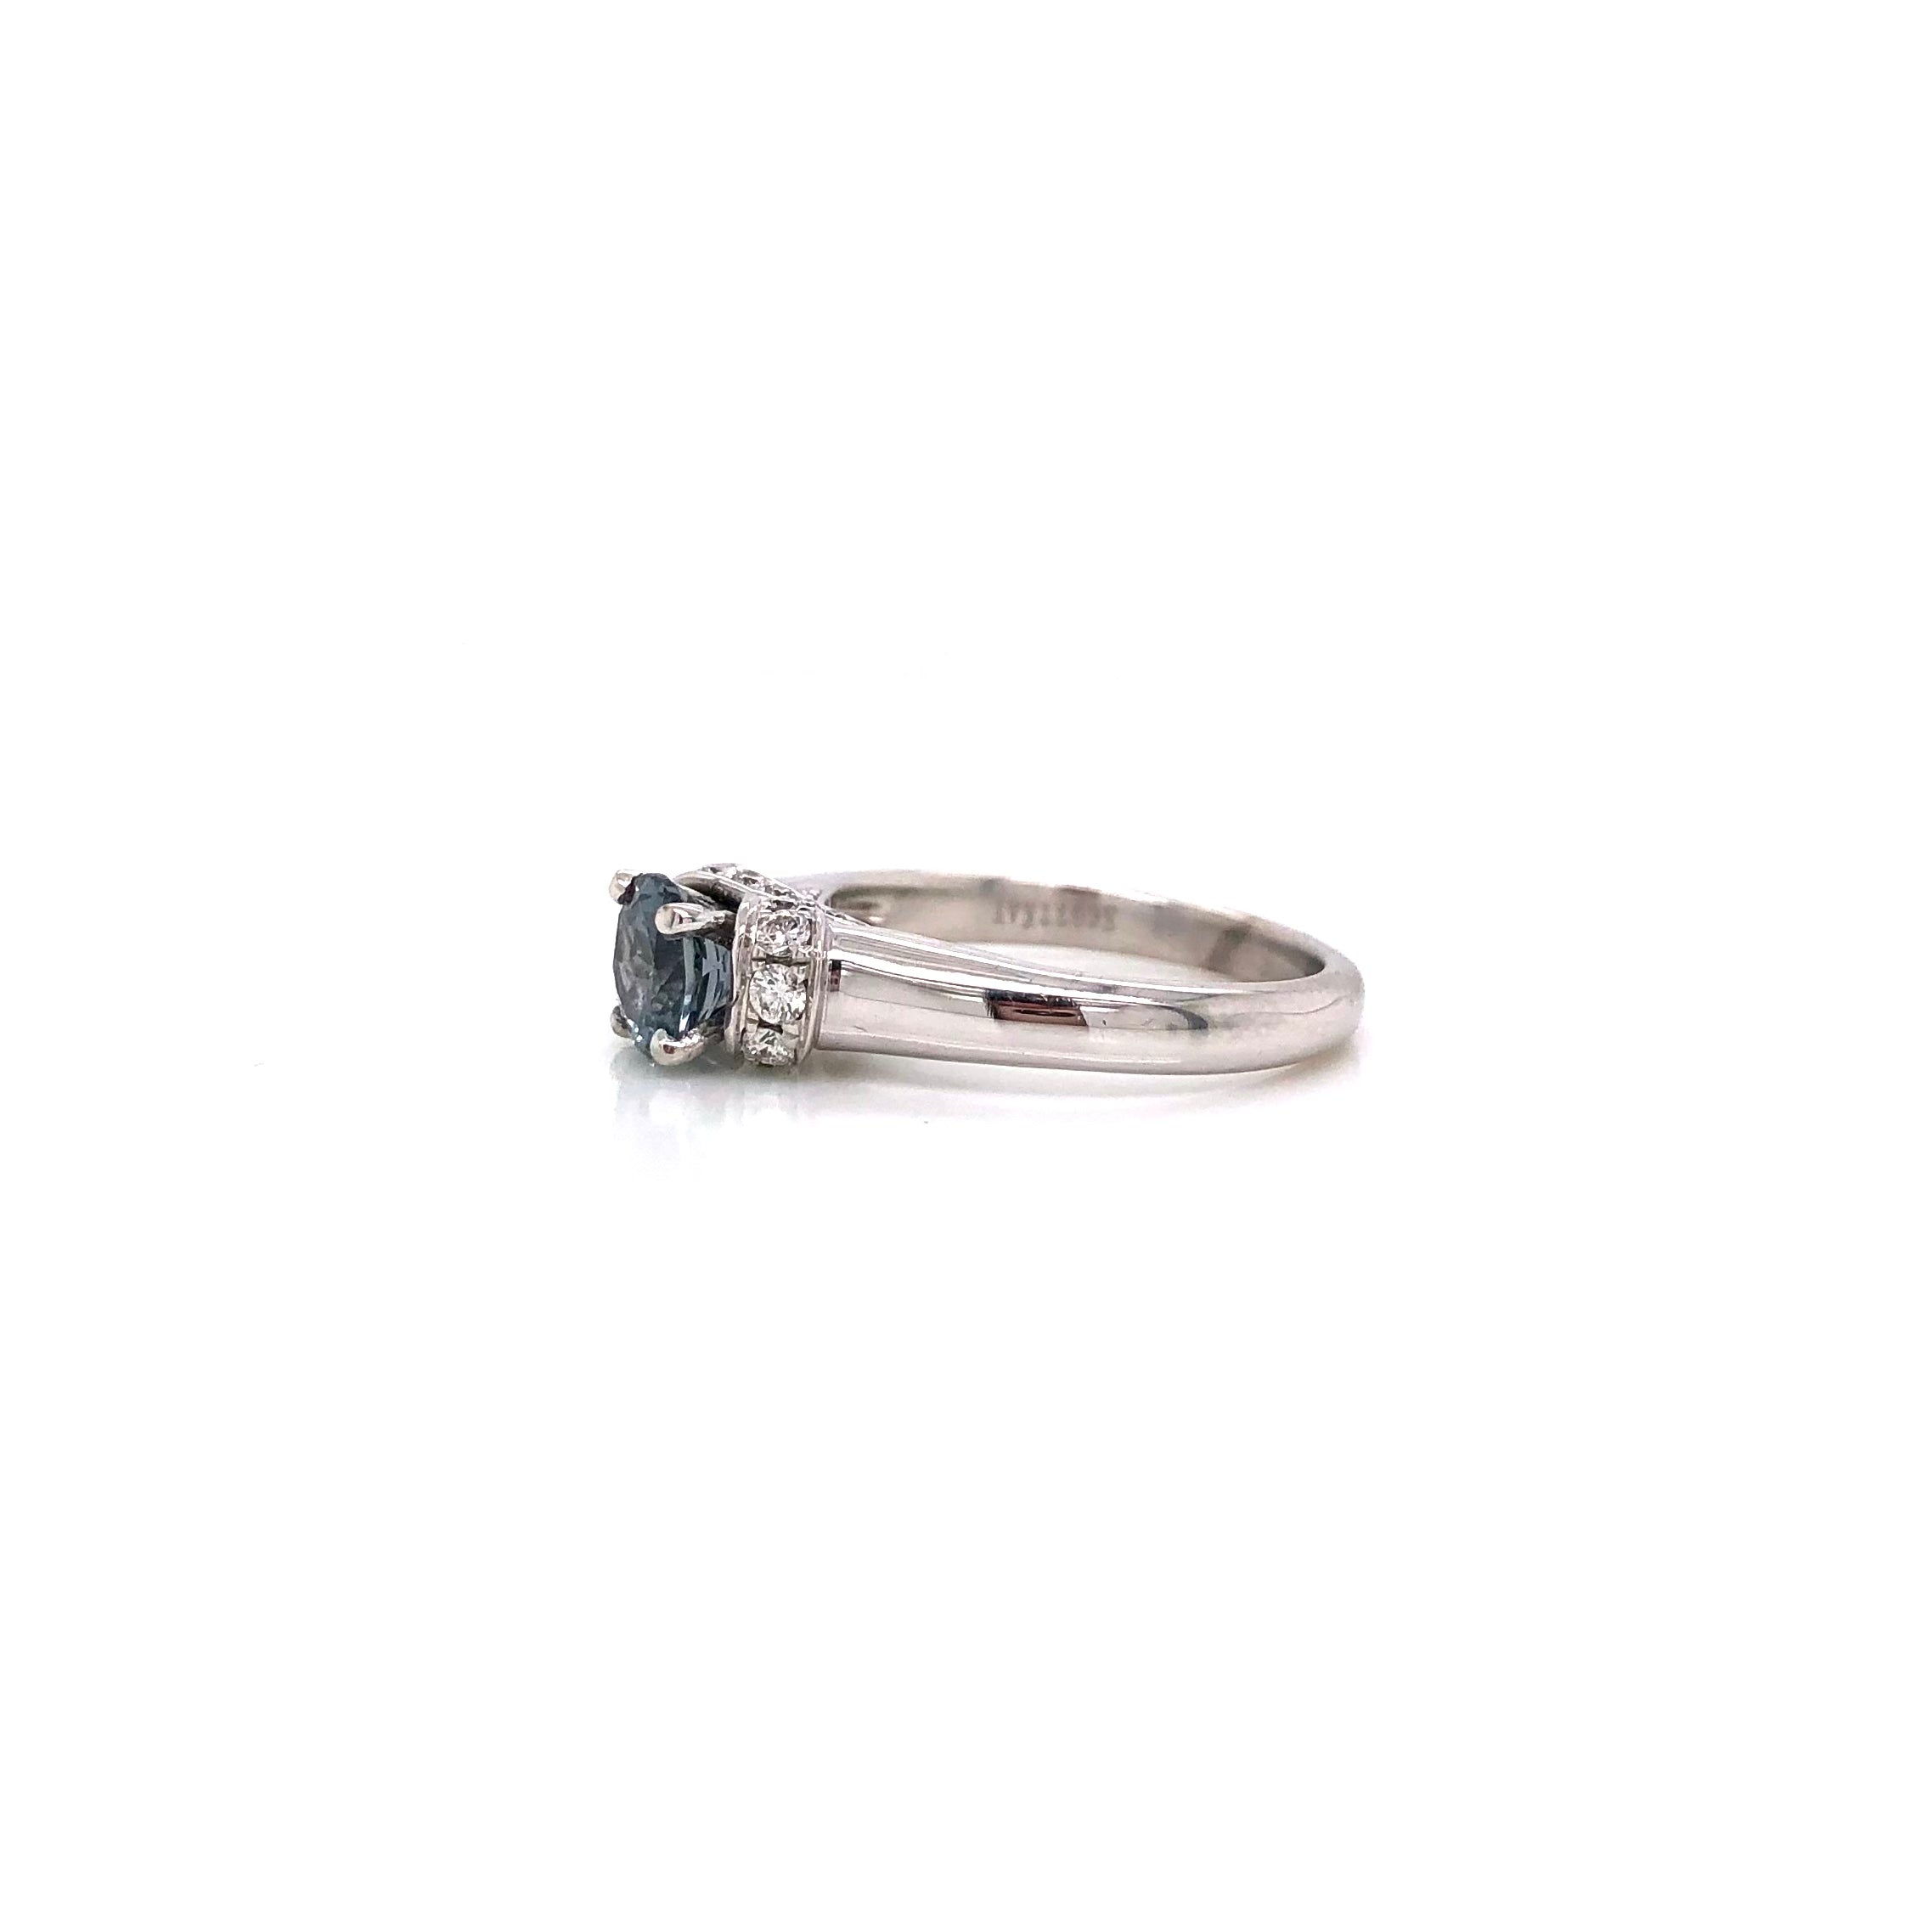 19K White Gold Custom Ring with Grey Spinel and Diamonds